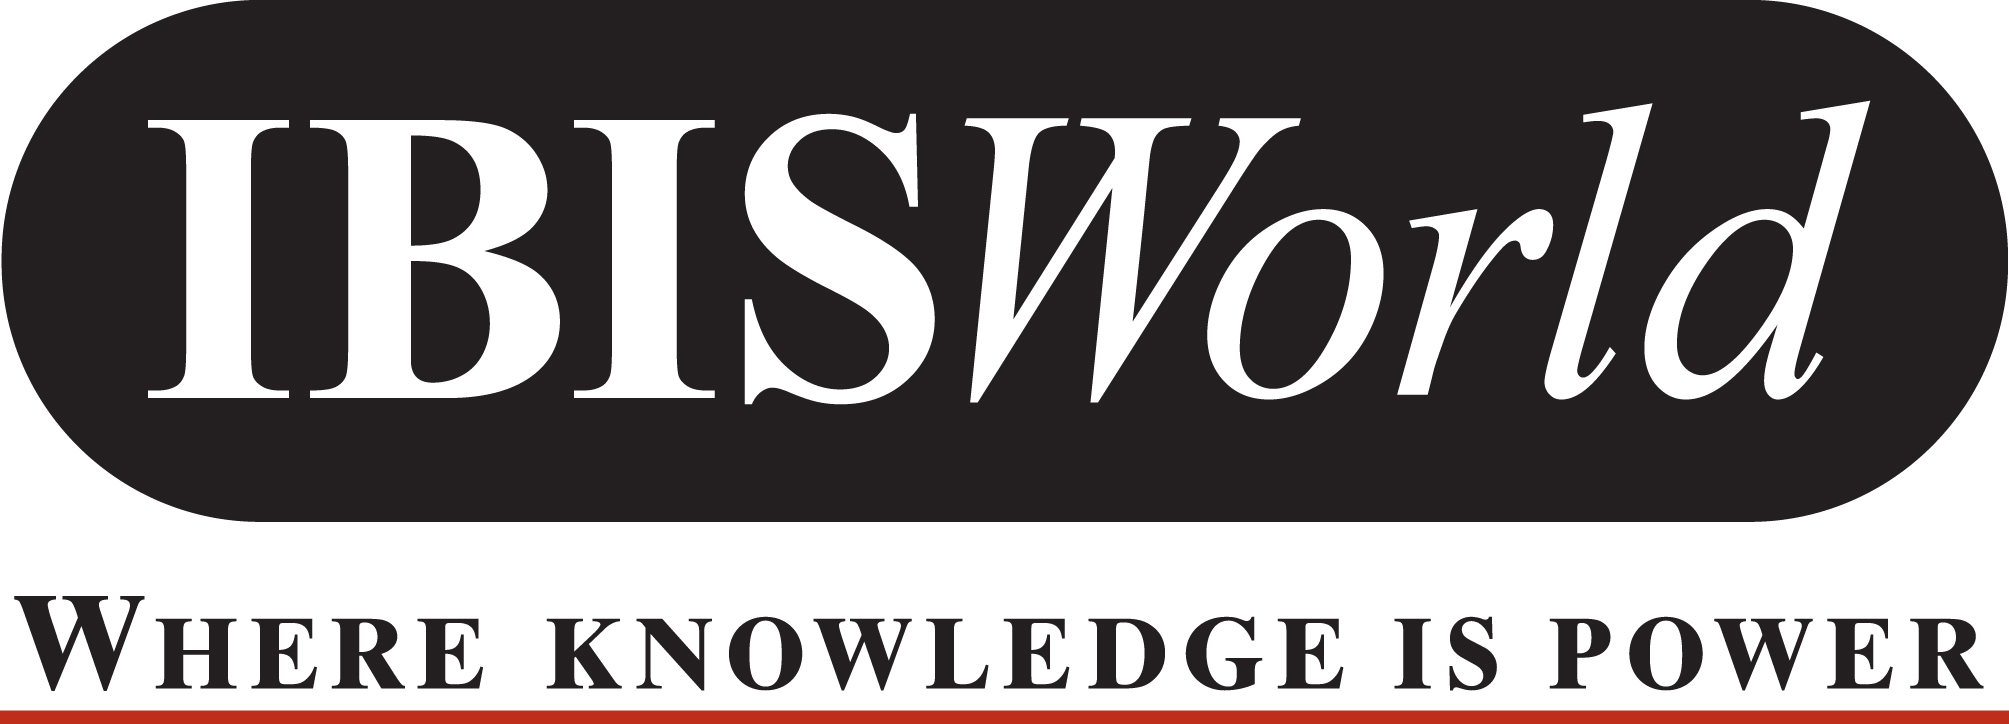 Weight Loss Services in the US - Industry Market Research Report IBISWorld